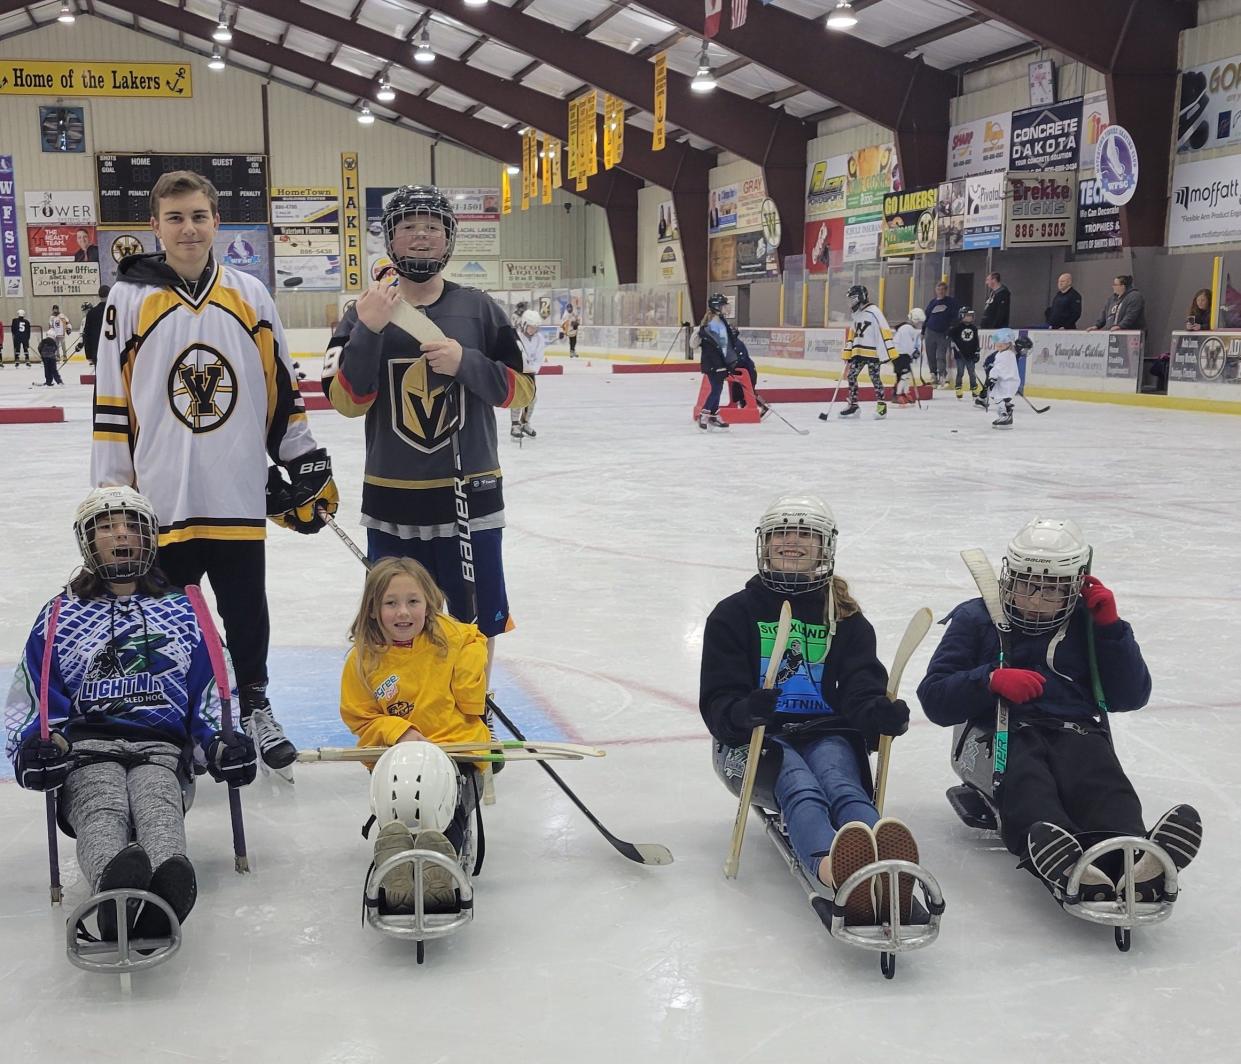 Jacksyn Wirkus, back row left side, and Weston Brink; Keirra Rudebusch, front row left side, Kadynce Ohman, Keira Henman, Brynn Eitreim and David Johnson getting some ice time at the Watertown Ice Arena.